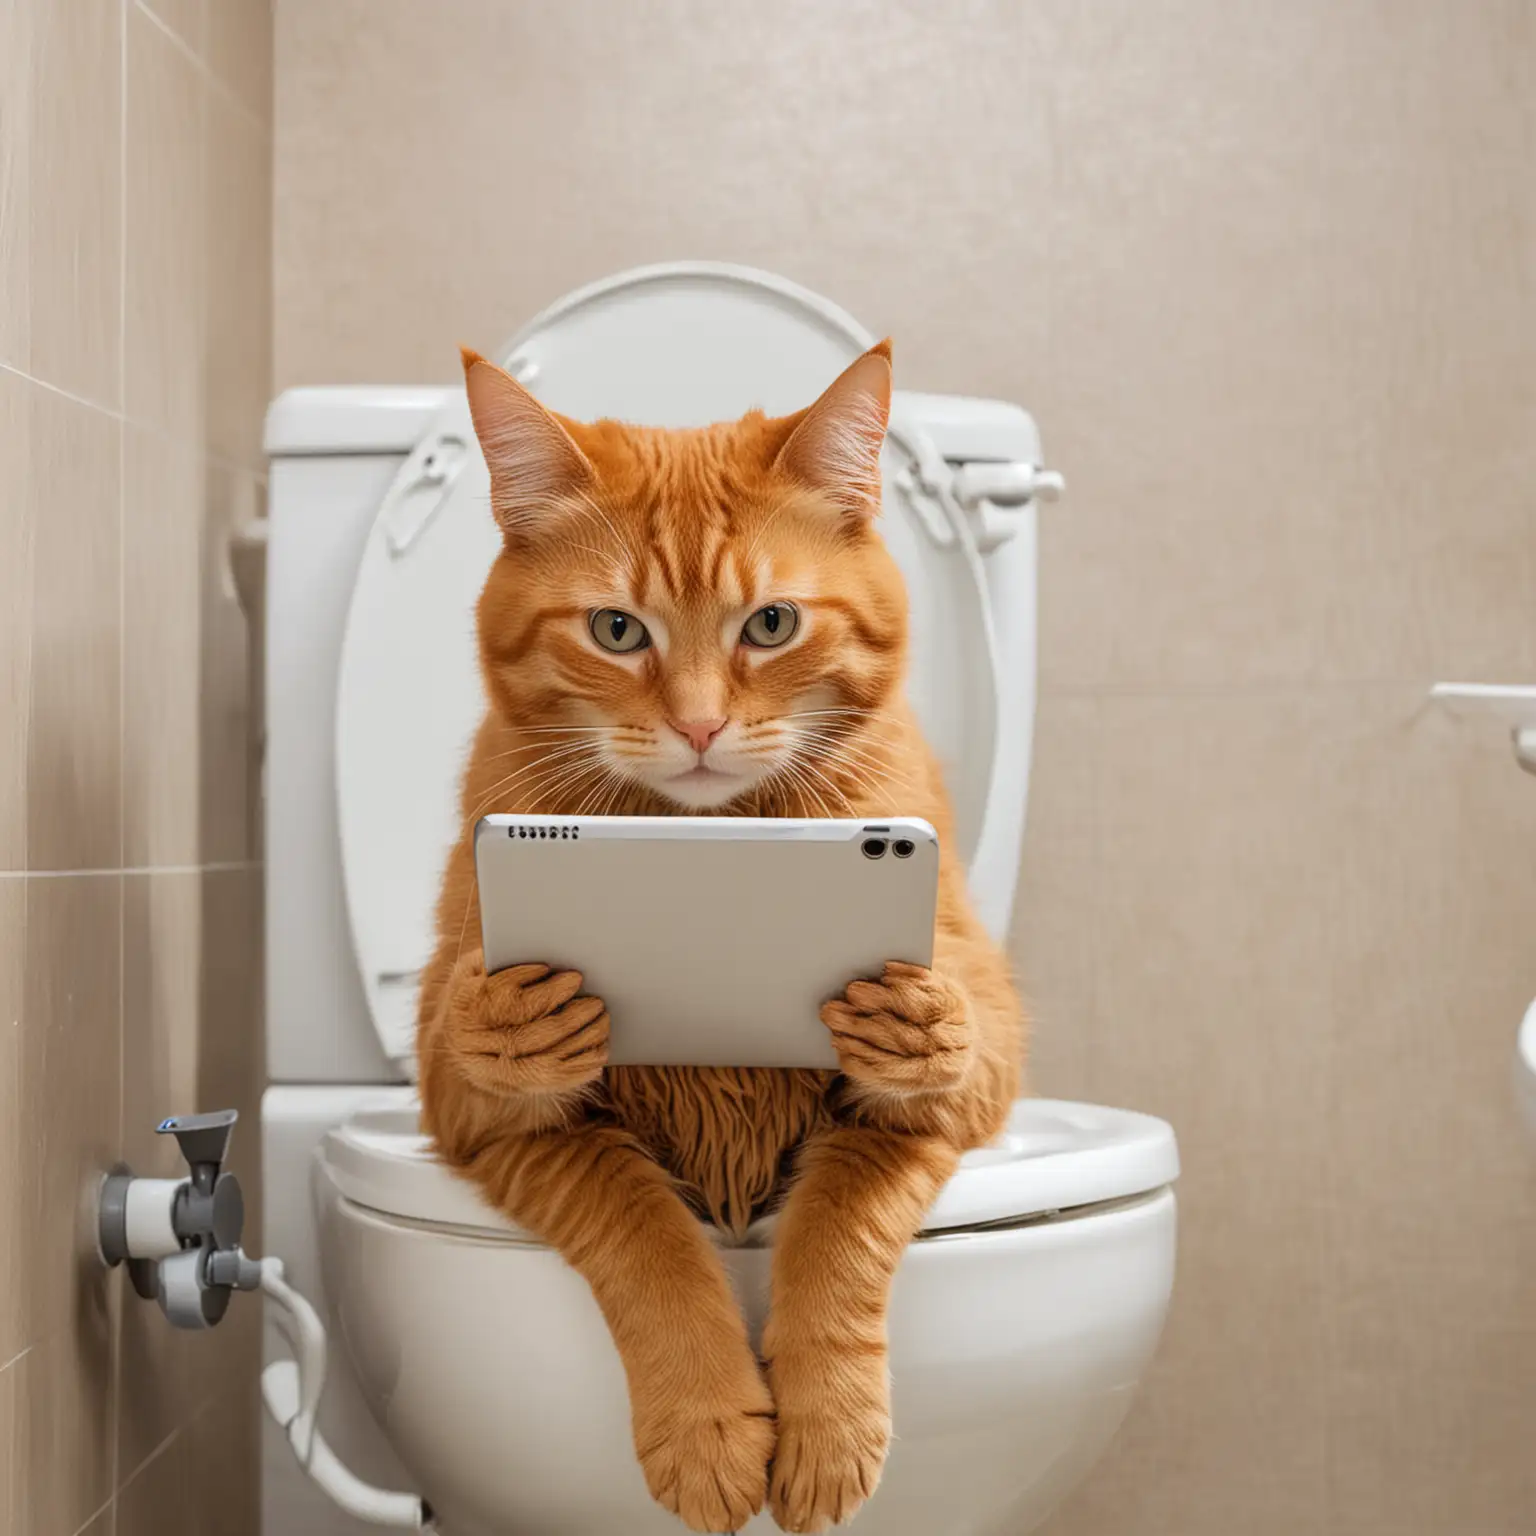 Ginger-Cat-Reading-News-on-Smartphone-in-Bathroom